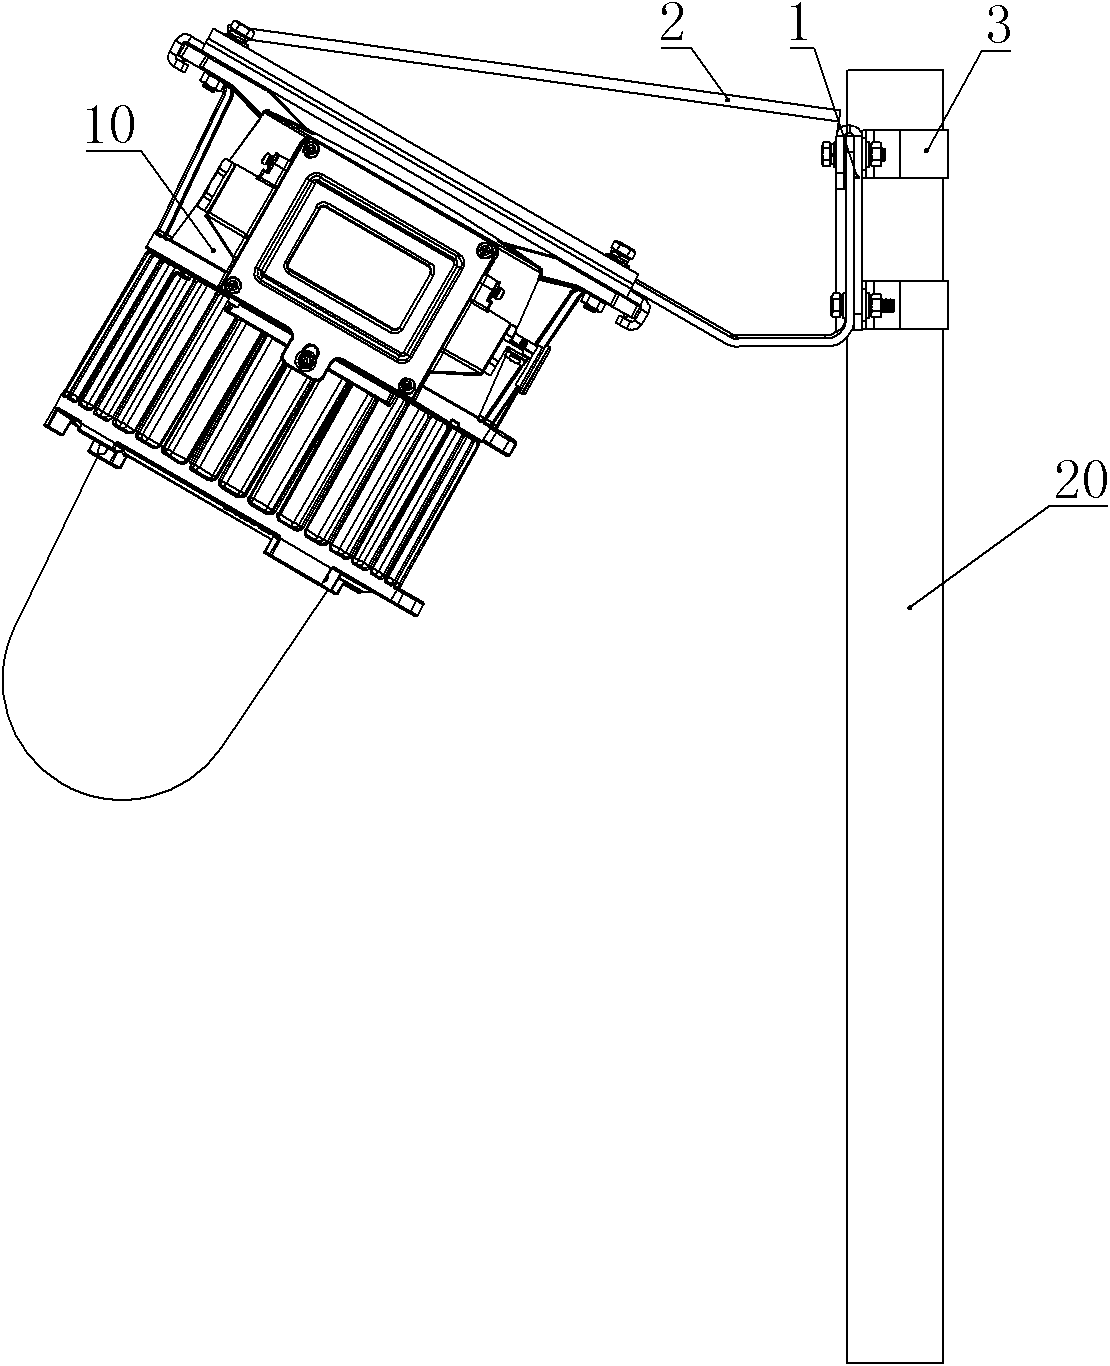 Column installation device for lamp